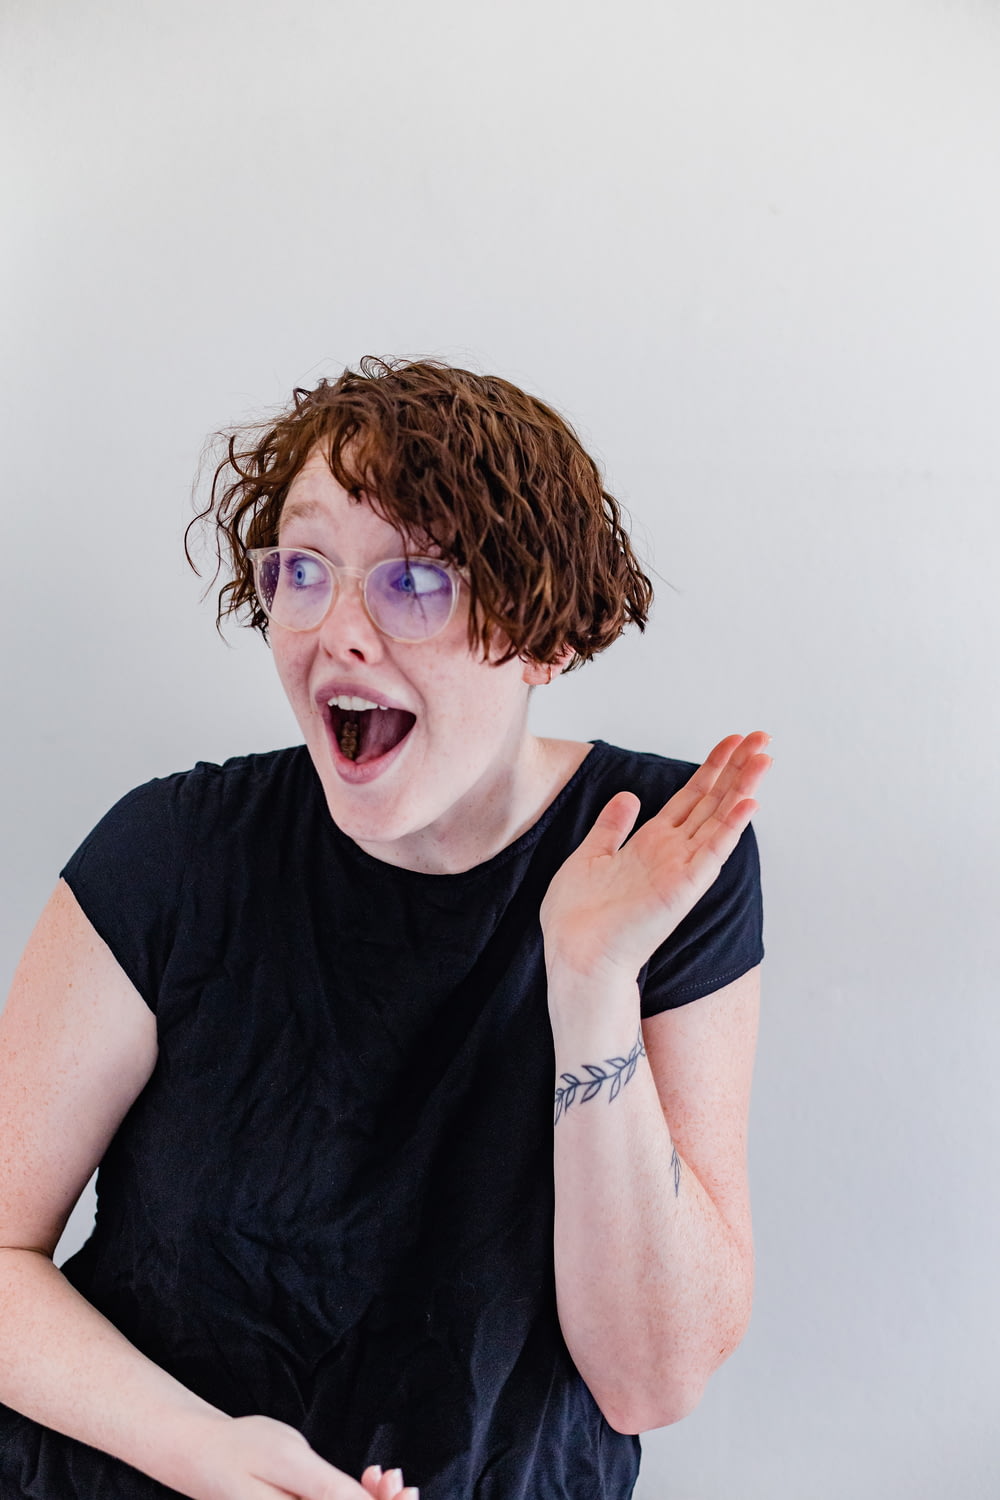 a woman with curly hair and glasses making a funny face